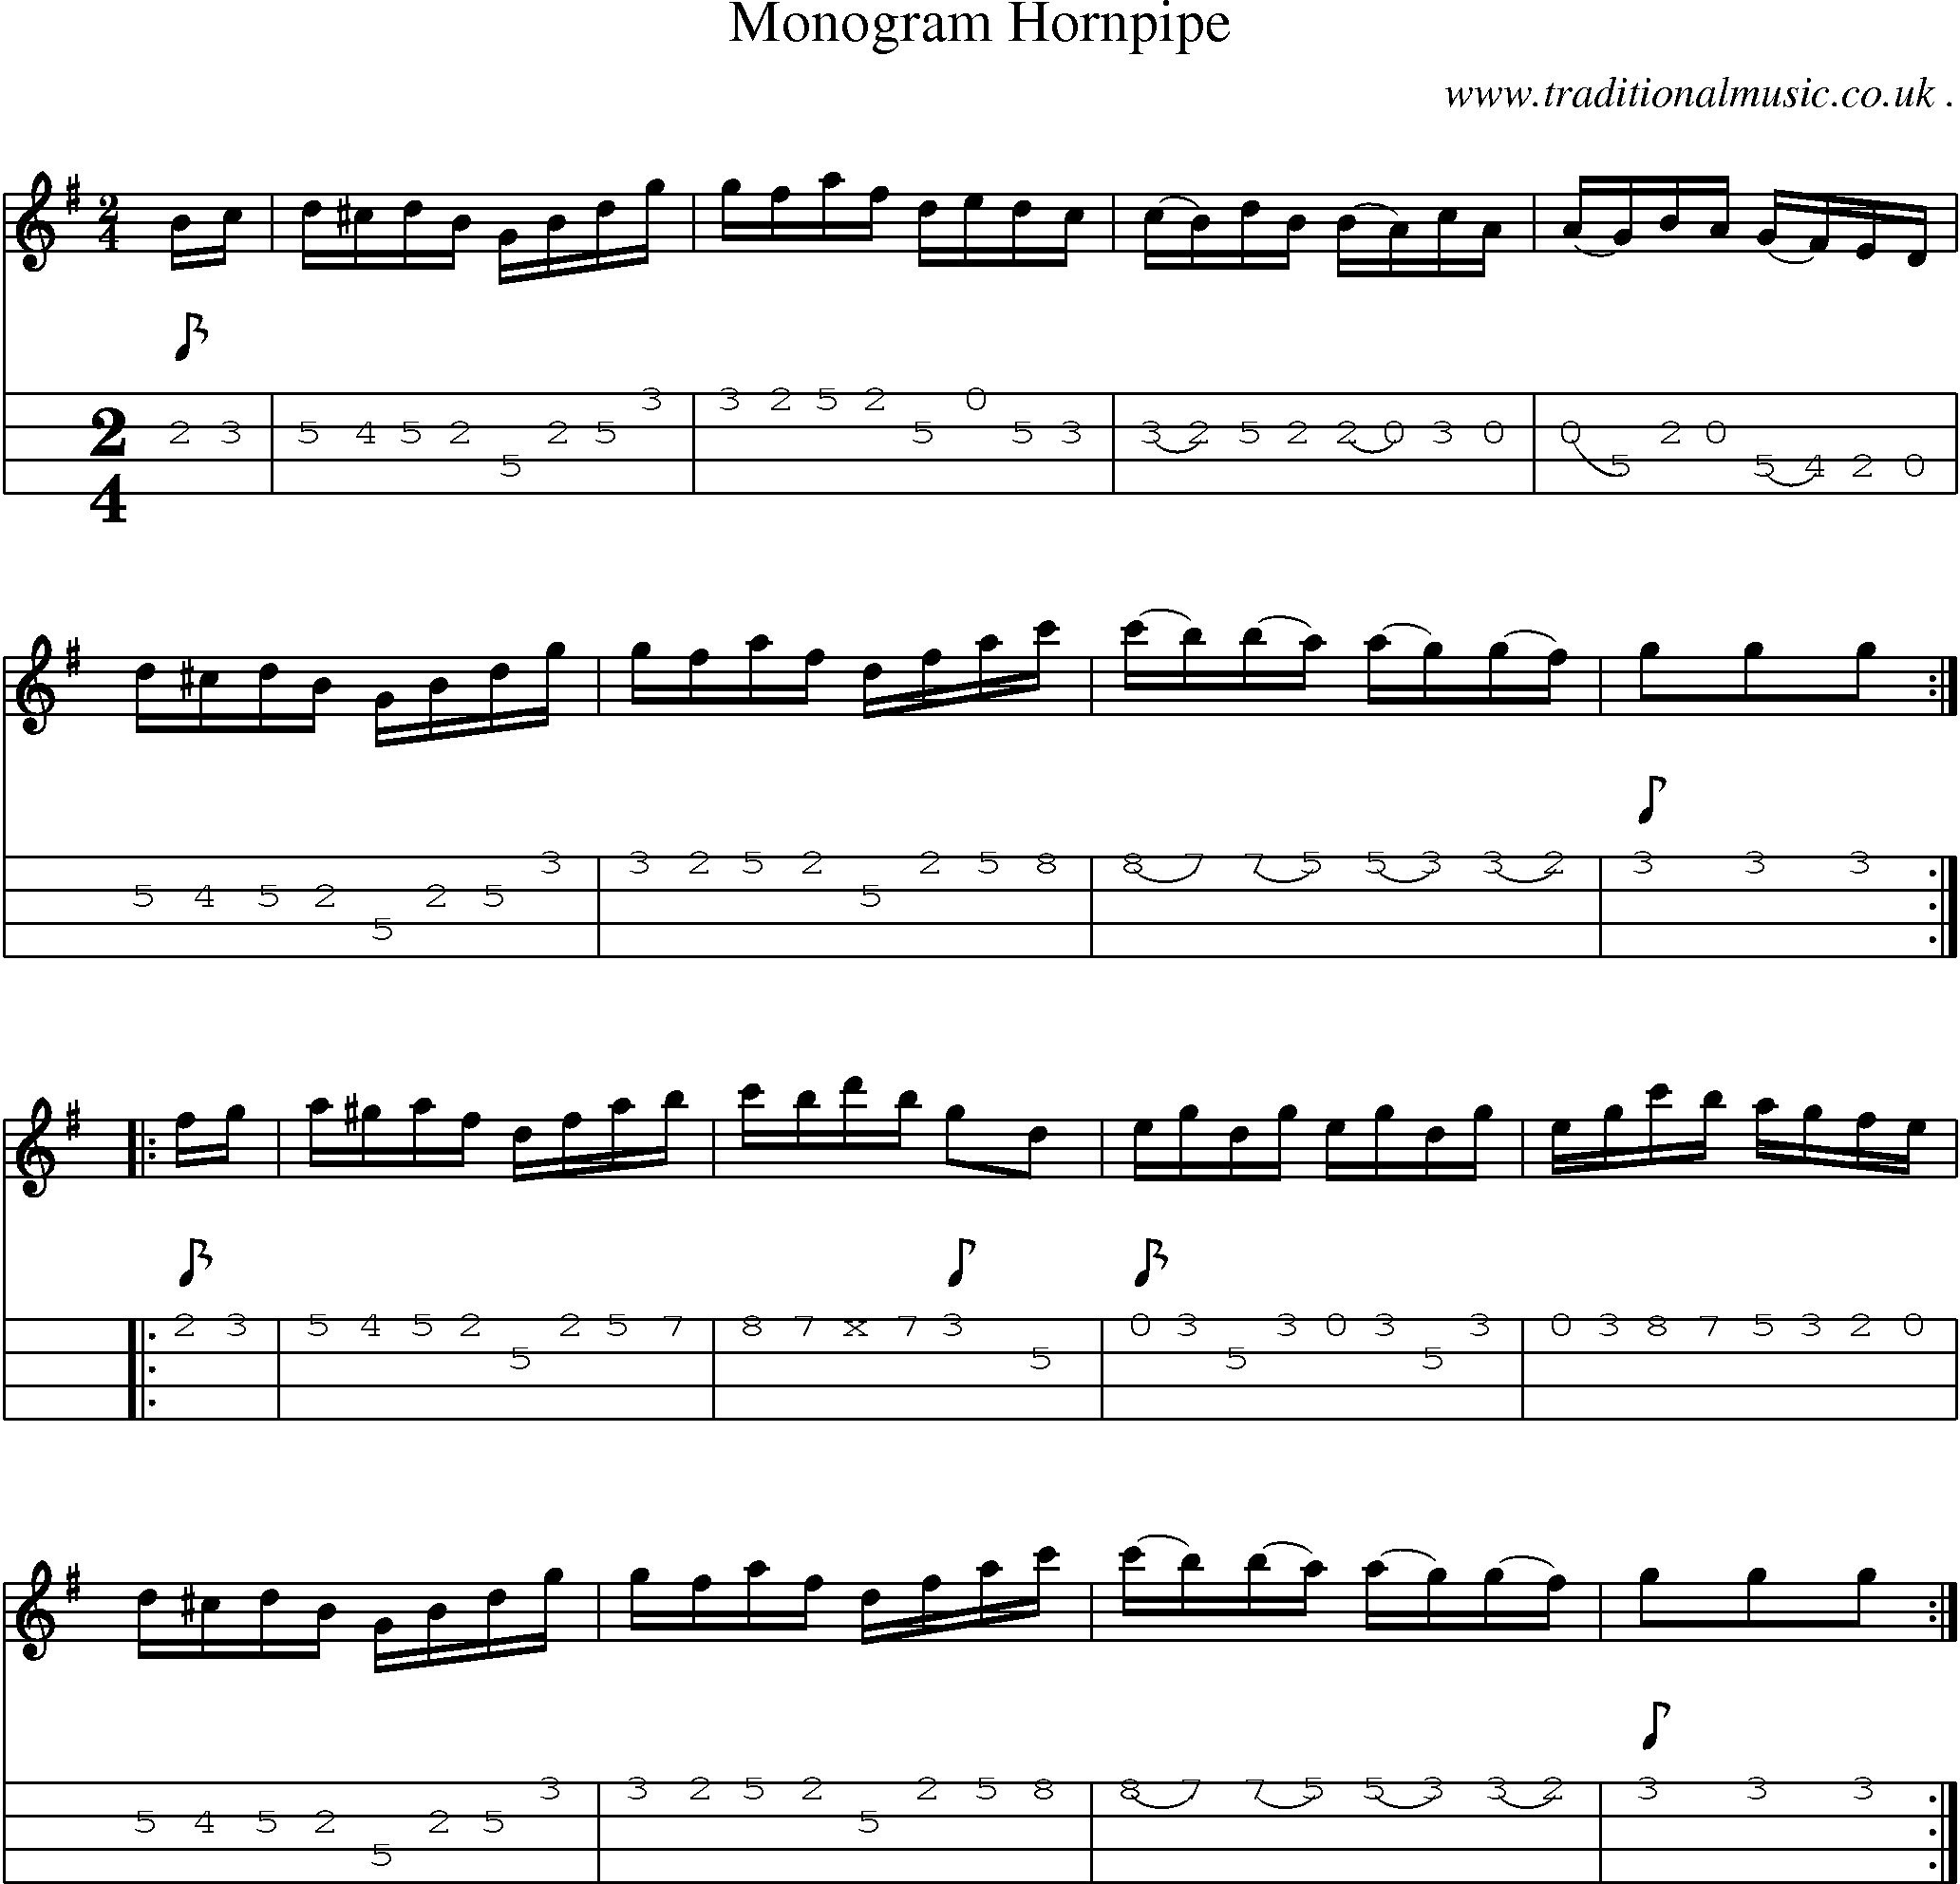 Sheet-Music and Mandolin Tabs for Monogram Hornpipe